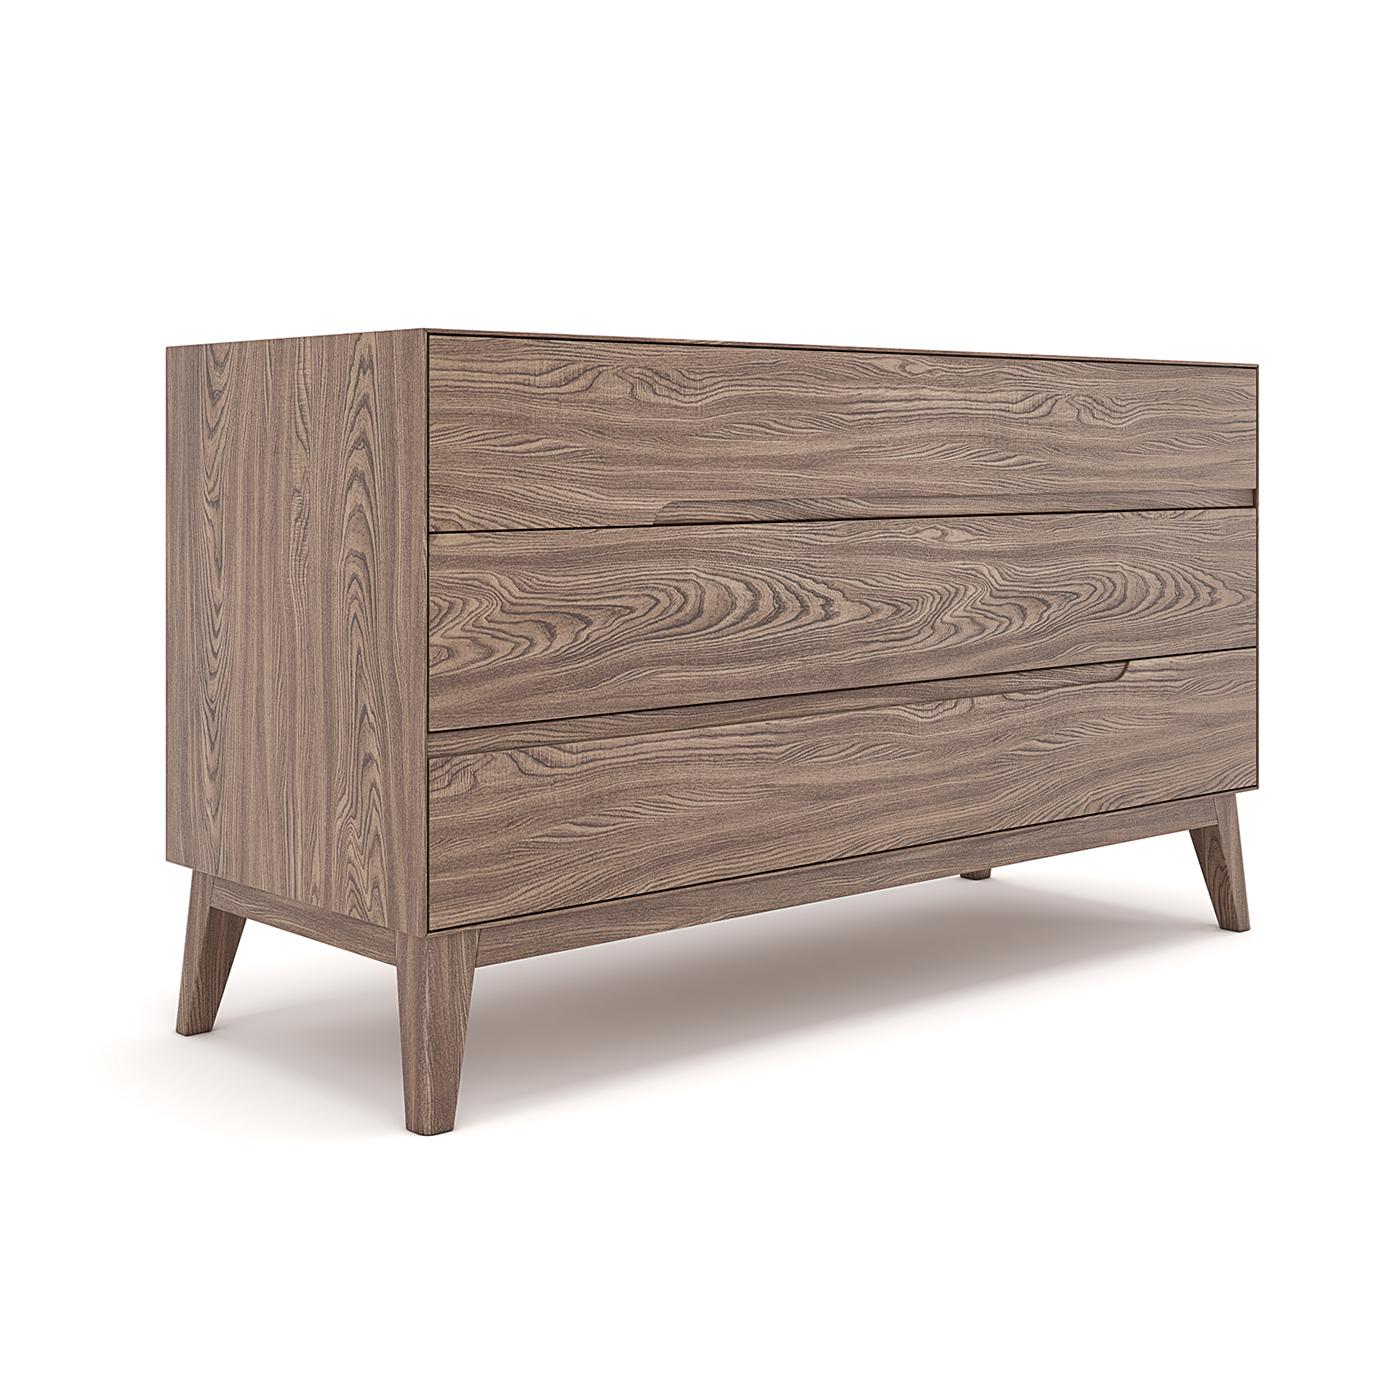 Showcasing a modern silhouette evocative of simplistic and stylish Scandinavian designs, this dresser is the perfect addition to an uncomplicated interior. Crafted of American black walnut in the Italian cabinet-making tradition, the sleek, linear